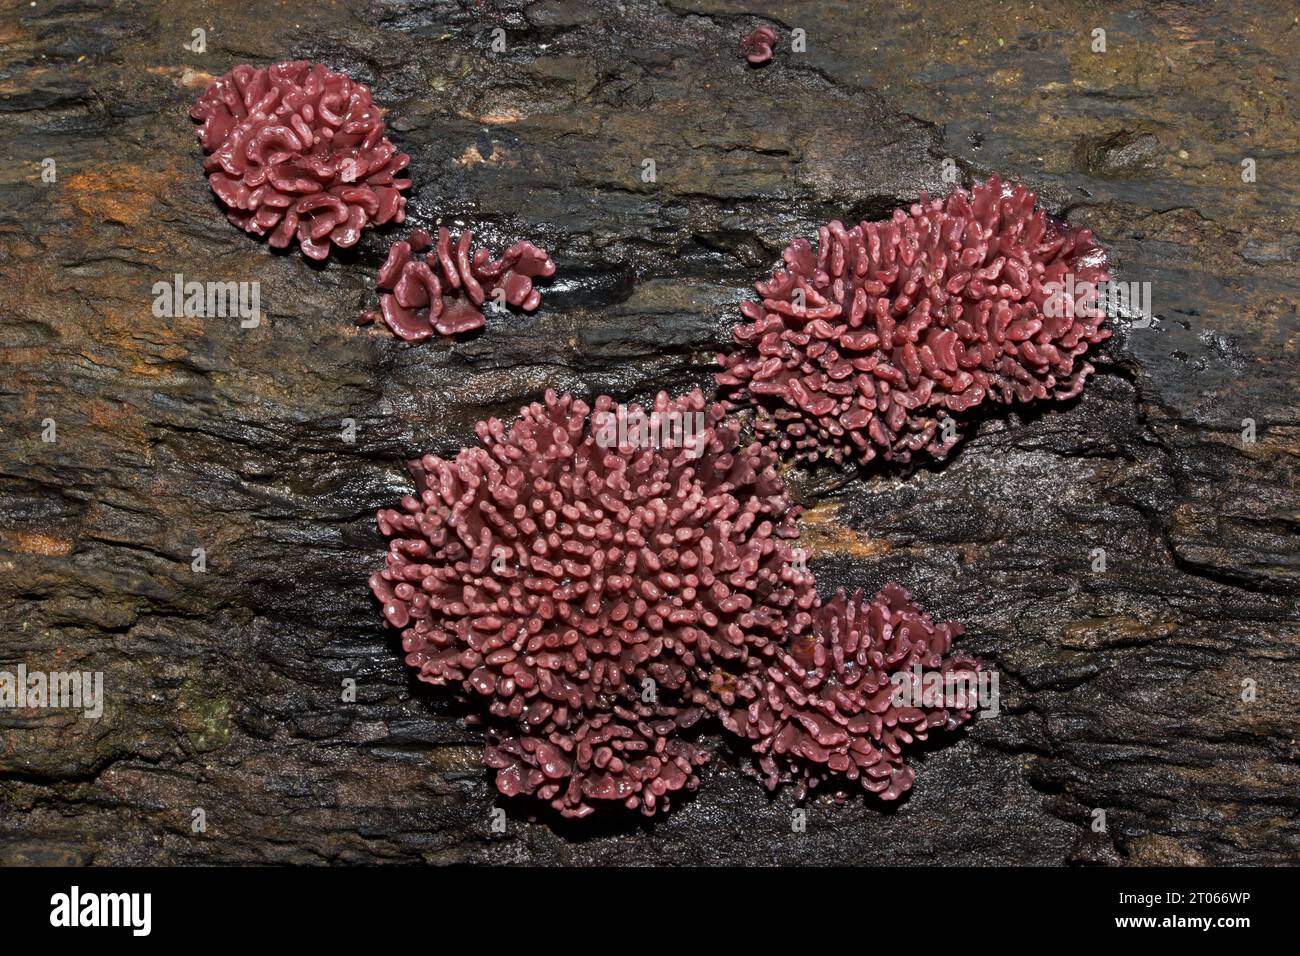 Ascocoryne sarcoides (purple jellydisc) is a jelly fungus found on dead wood. It is distributed widely in North America, Europe and Asia. Stock Photo